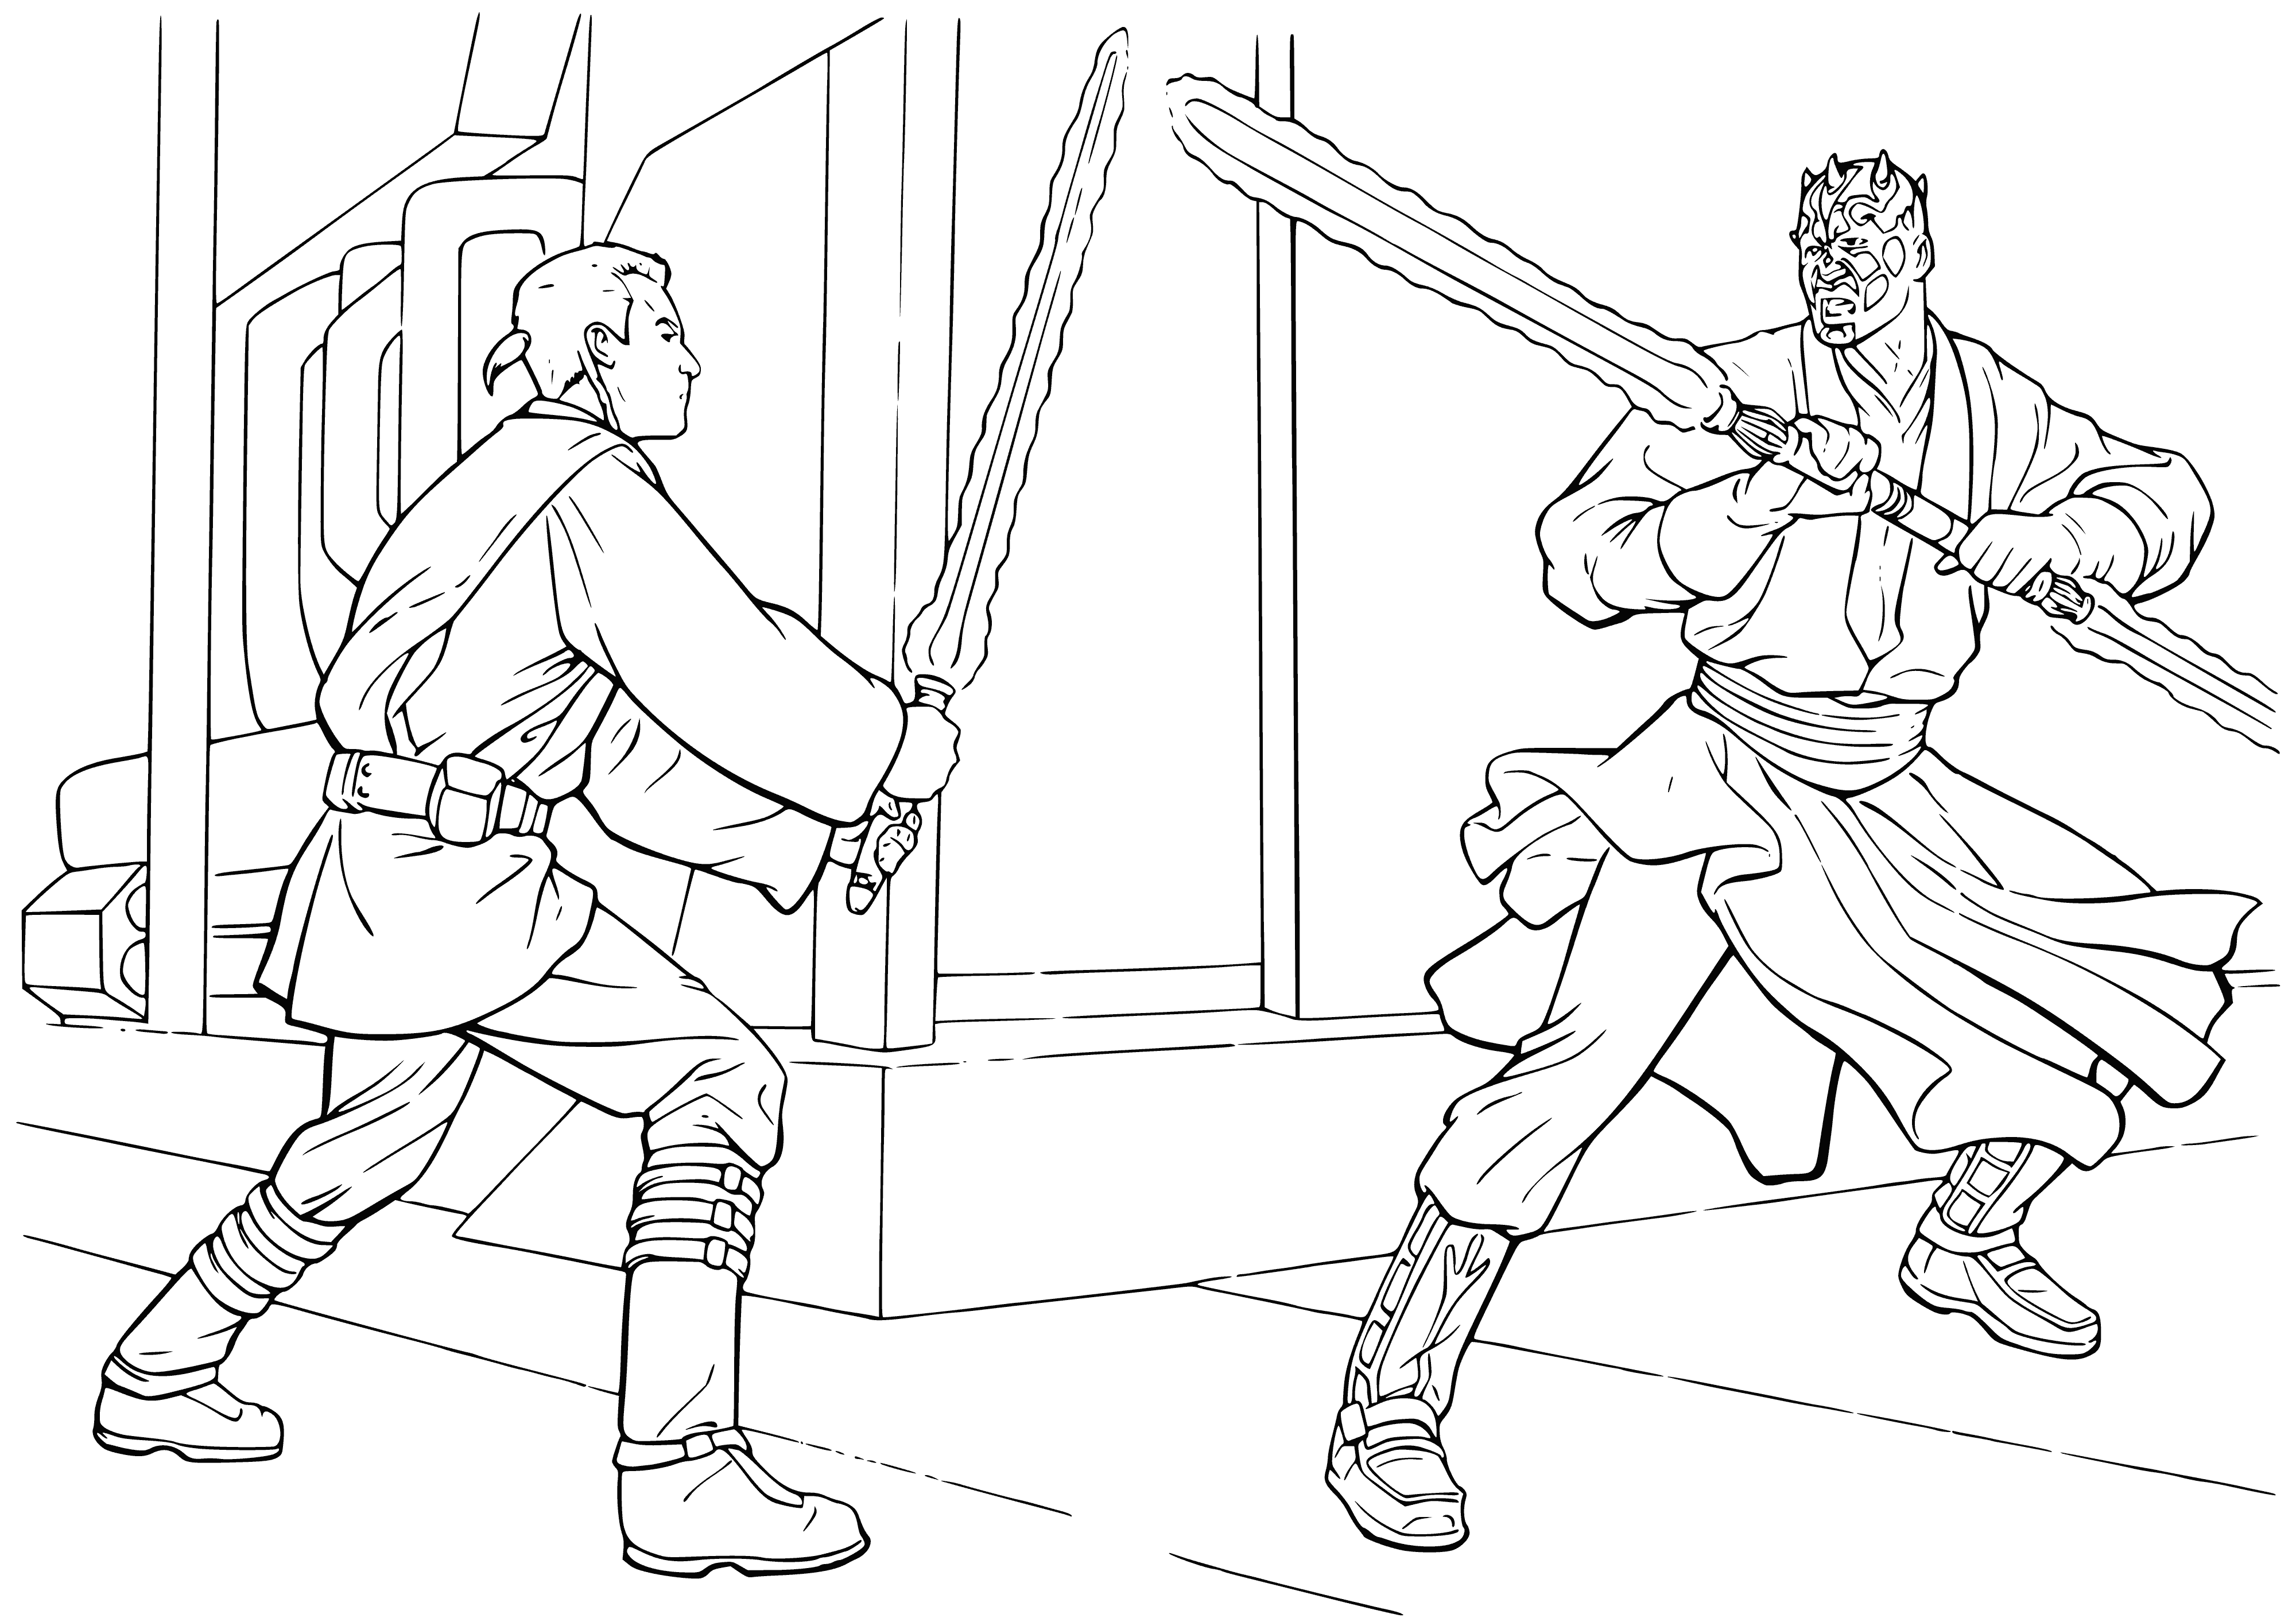 coloring page: Man in a robe w/ a lightsaber stands on a hill, looking at a distant city as a burning ship appears before him w/ red lightsaber.